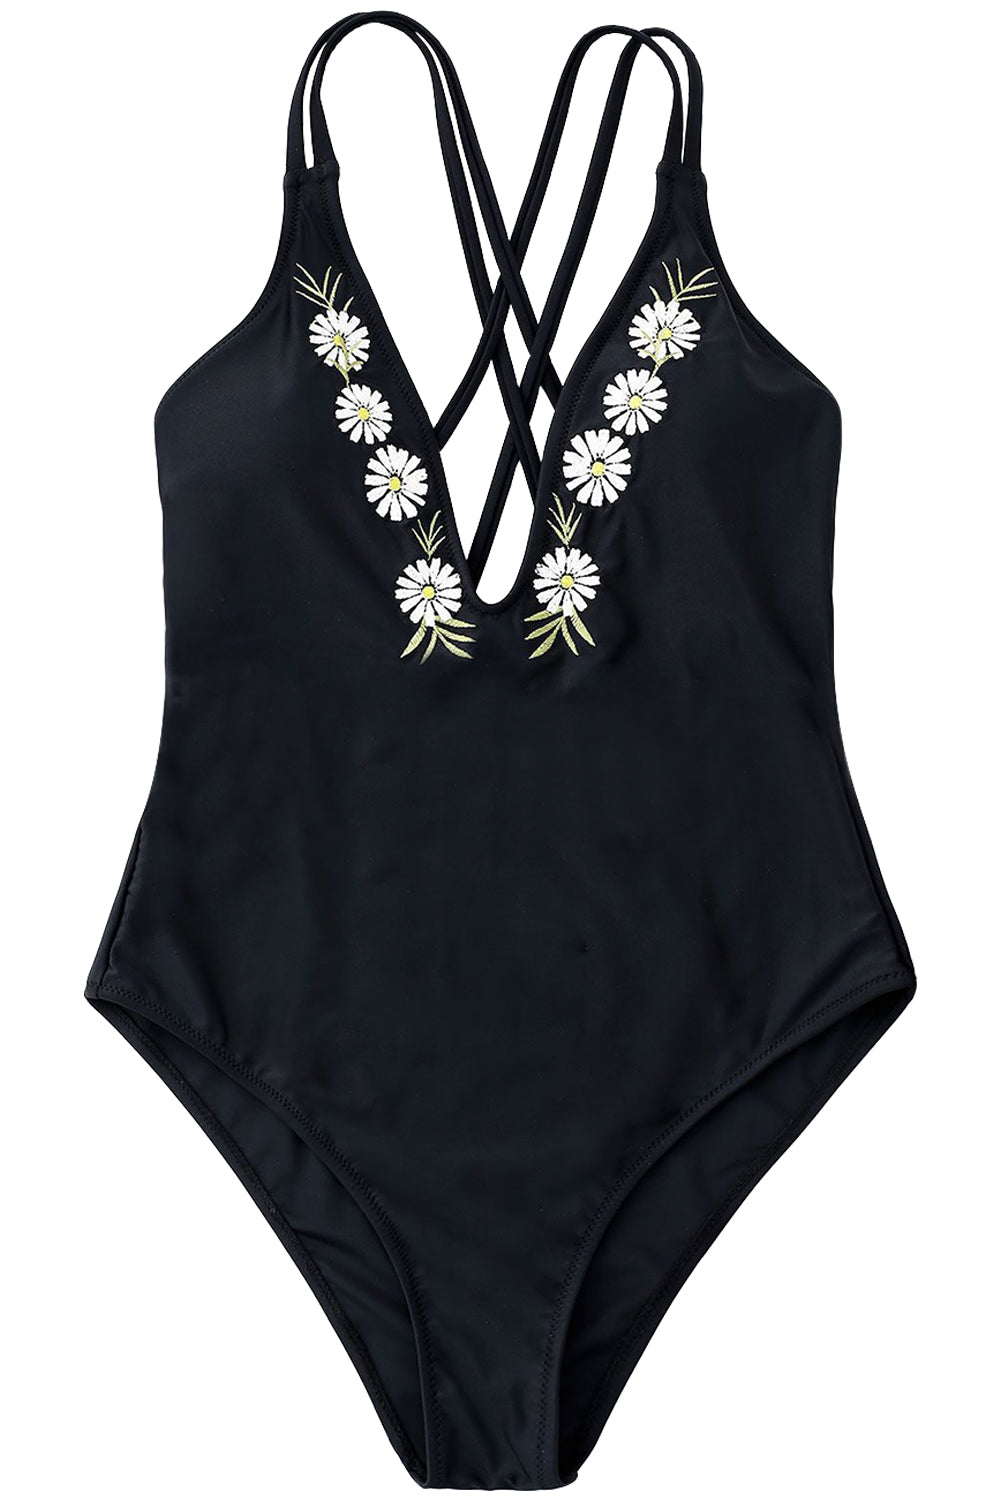 Iyasson White Daisy Embroidery With Deep V-neck One-piece Swimsuit